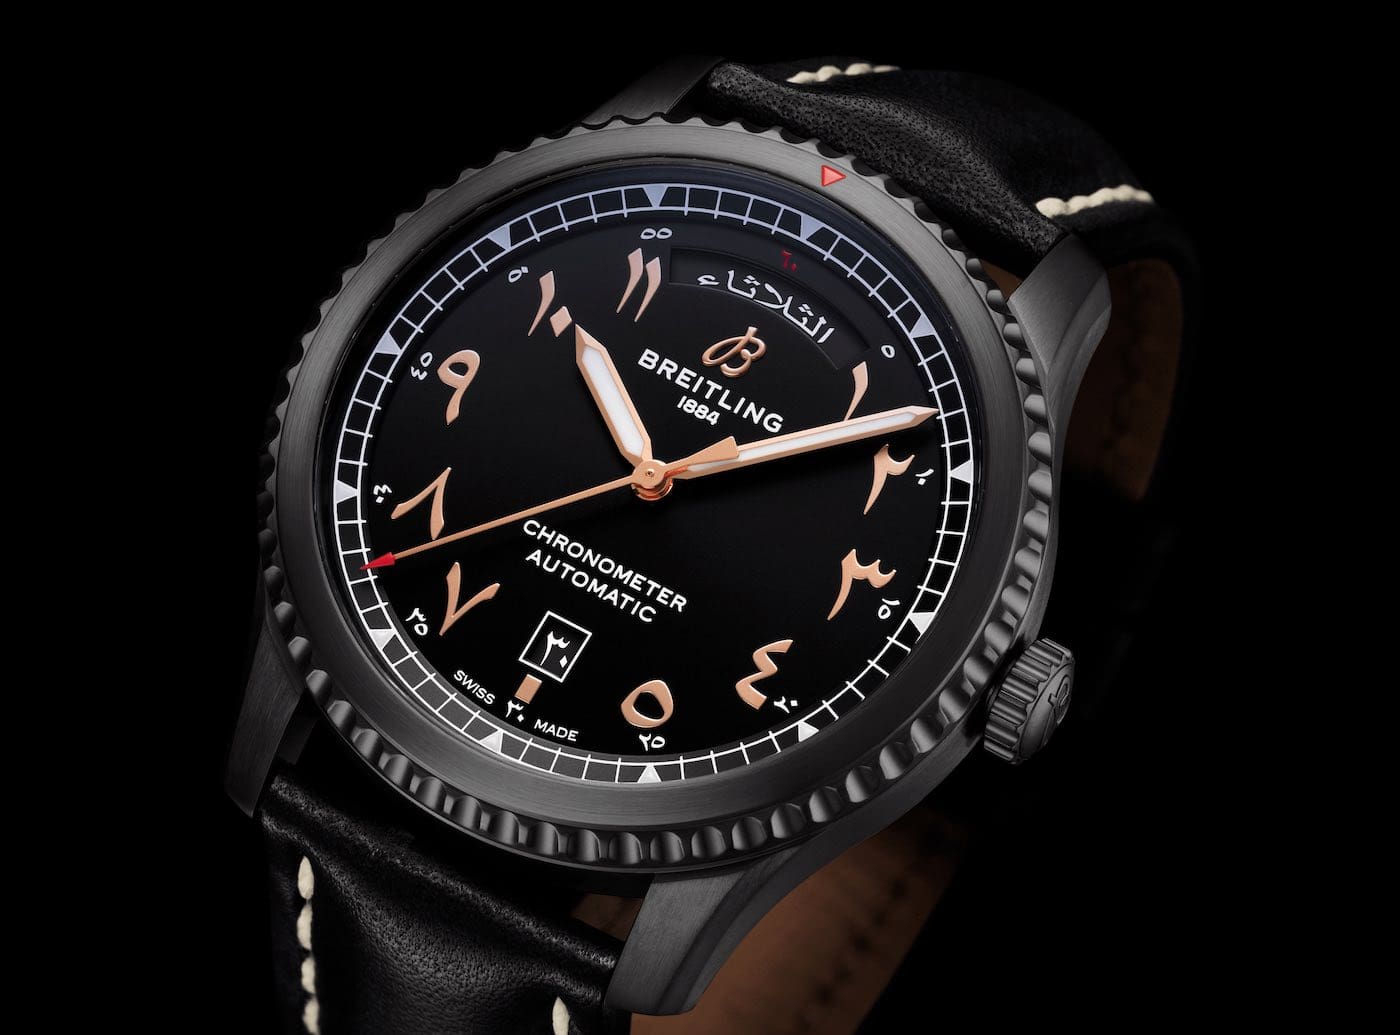 INTRODUCING: The Breitling Aviator 8 Day & Date 41 Etihad Airways Limited Edition